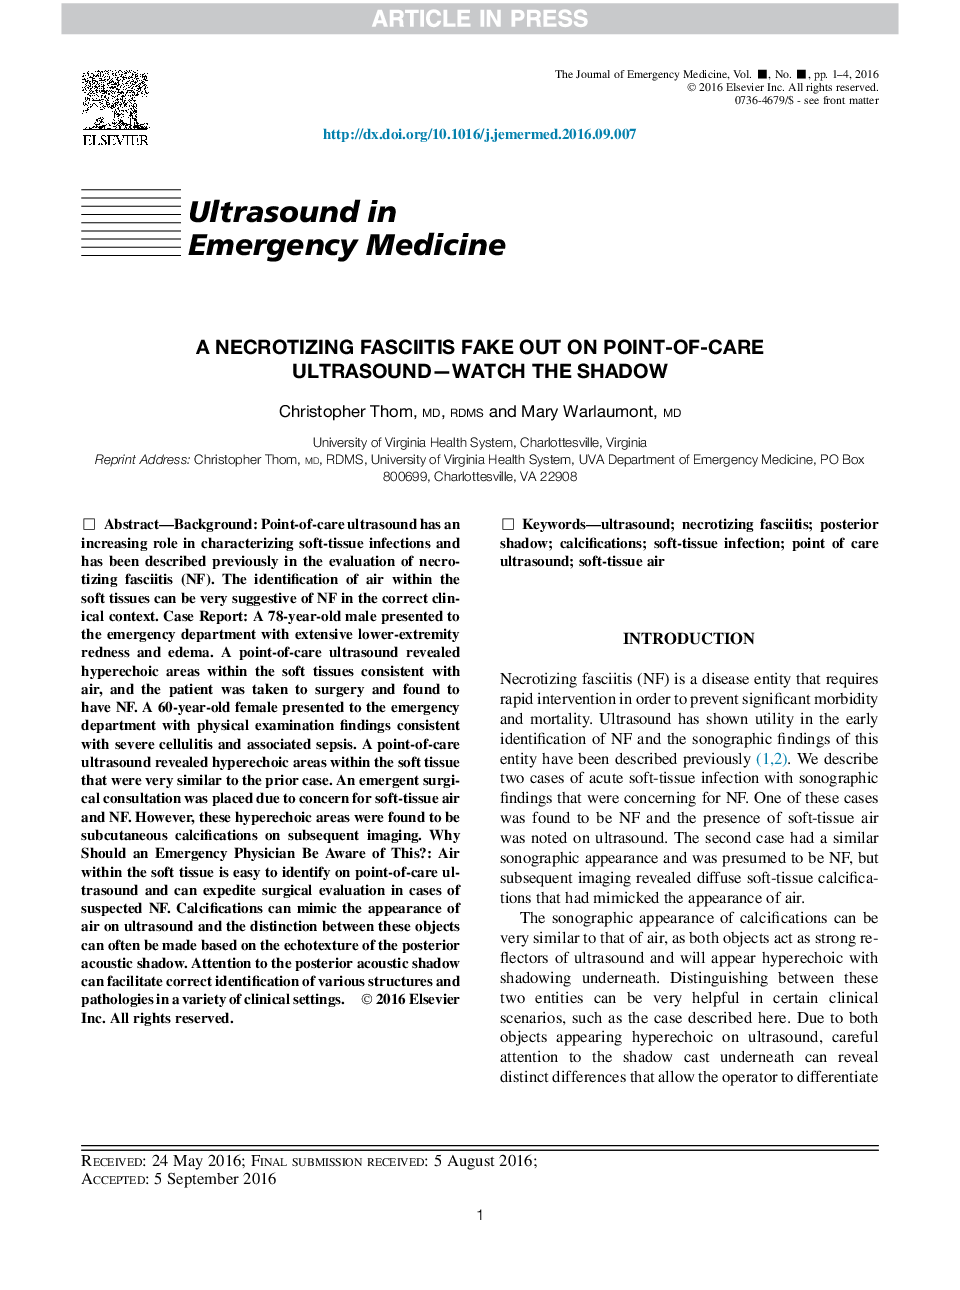 A Necrotizing Fasciitis Fake Out on Point-of-Care Ultrasound-Watch the Shadow